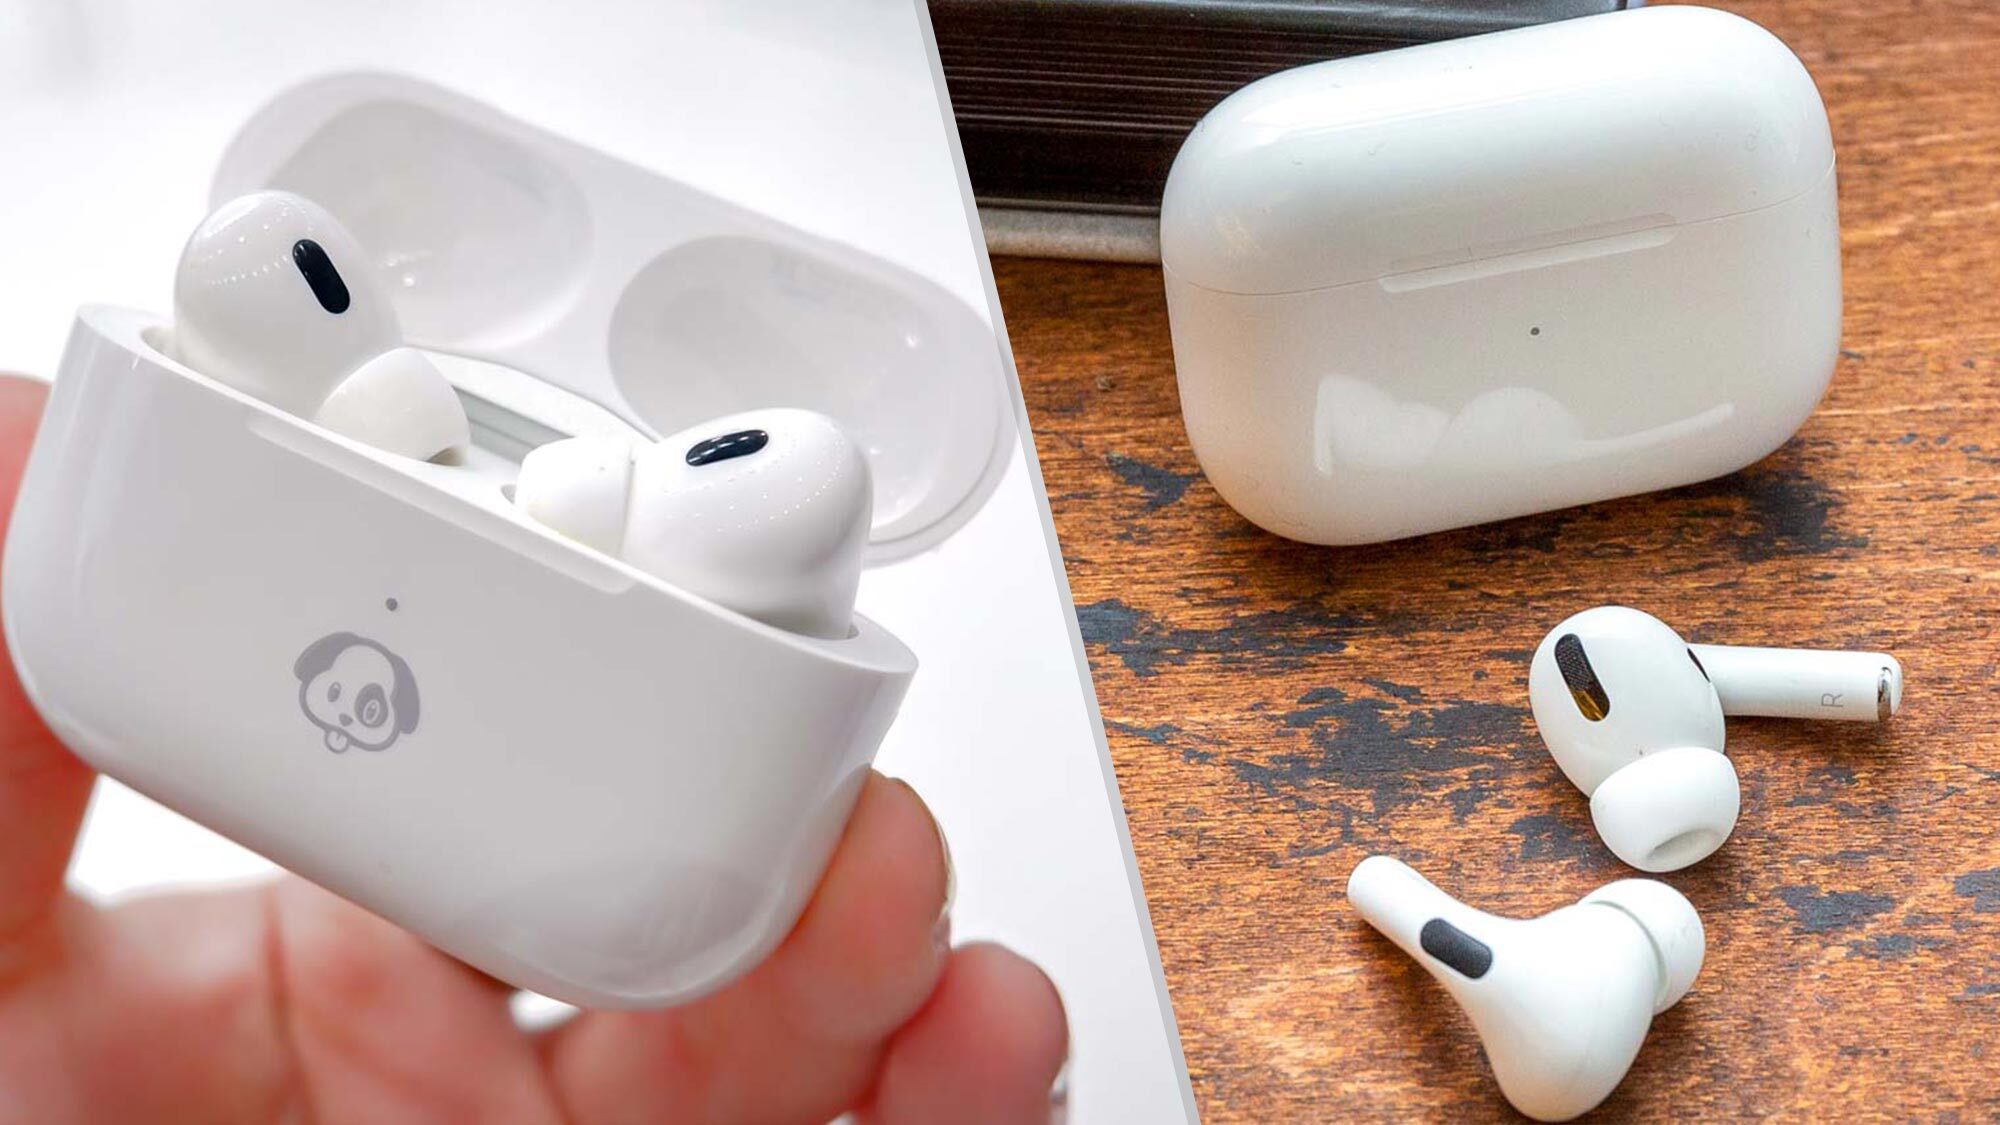 Image showing AirPods Pro 2 facing AirPods Pro.